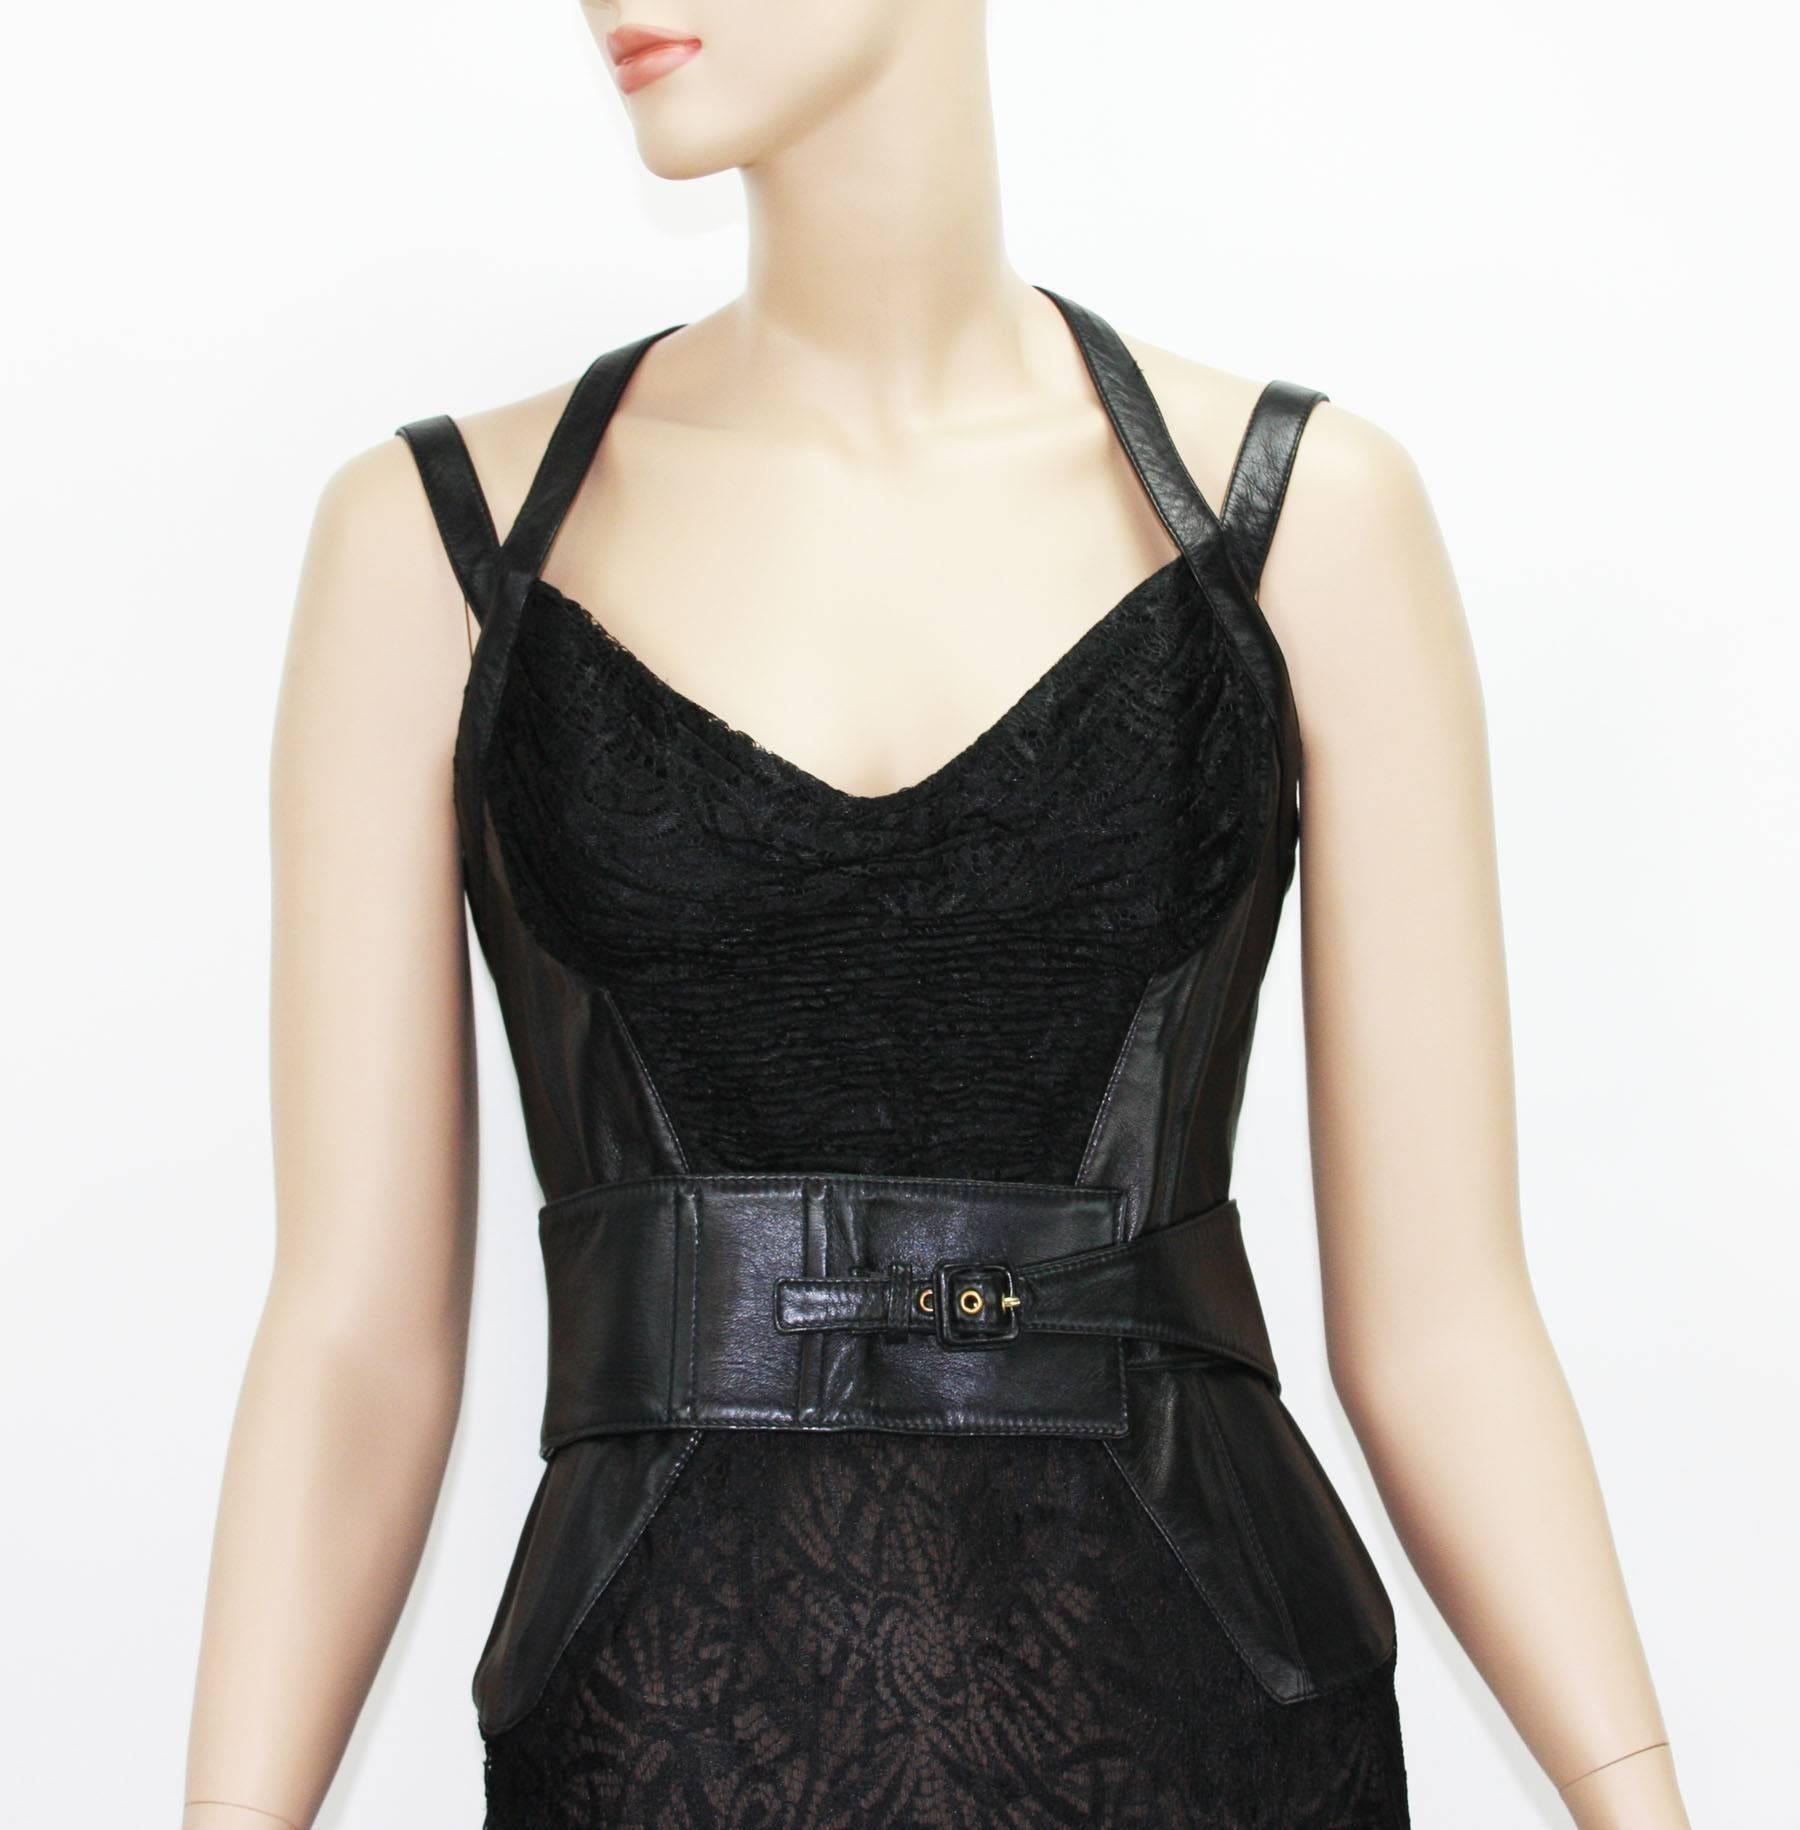 Women's New Gianni Versace Couture F/W 2001 Leather Lace Black Bandage Buckled Gown For Sale